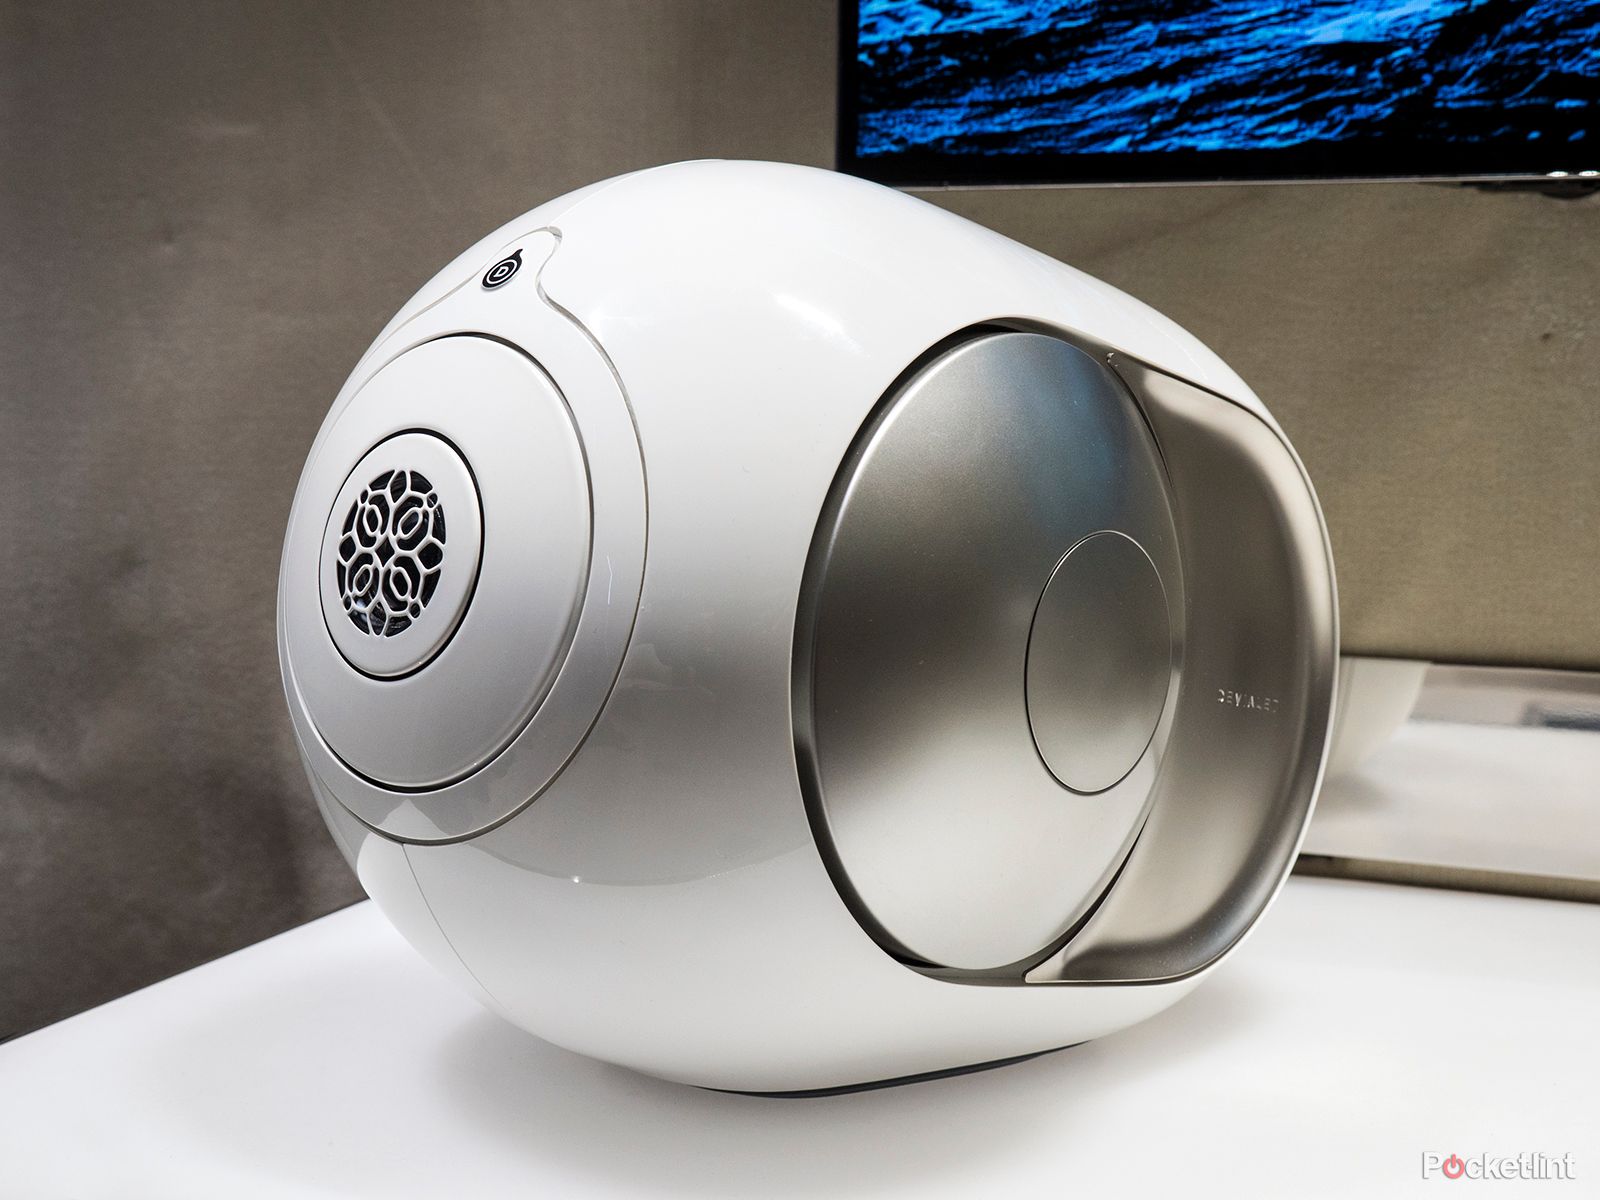 devialet silver phantom review futuristic funk from this french fancy will make your ears dance with delight image 2